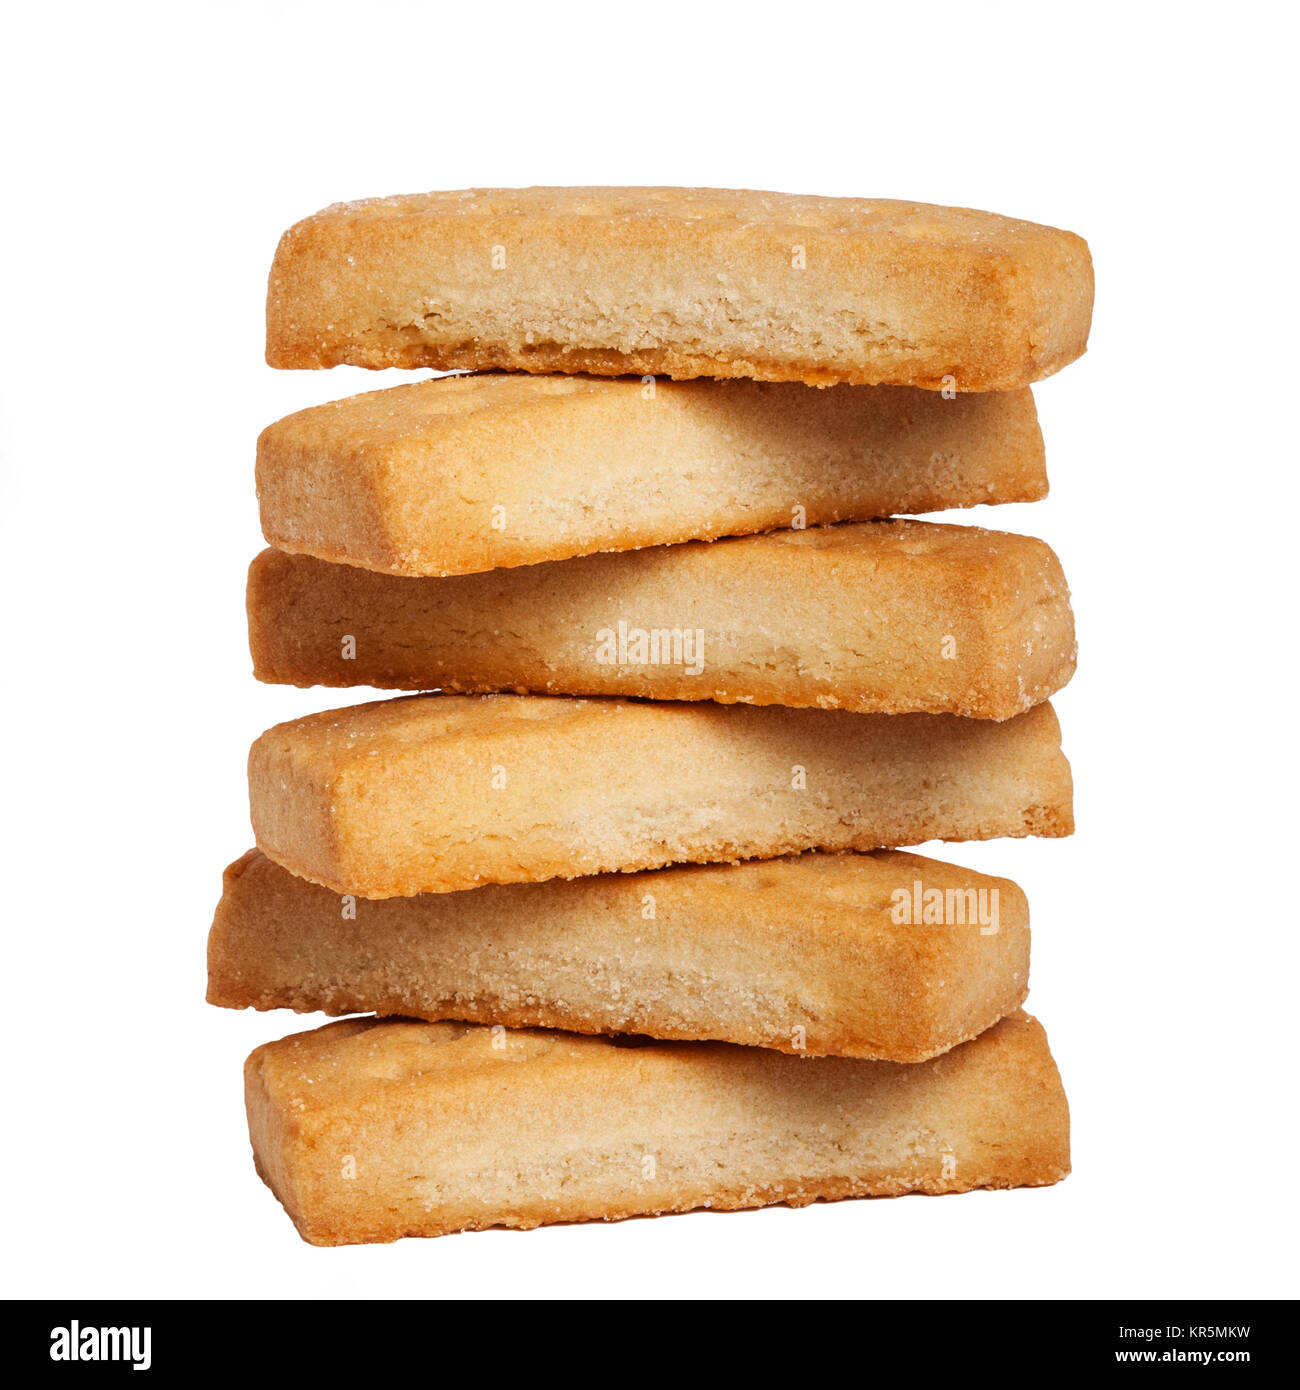 A stack of shortbread finger biscuits on a white background Stock Photo